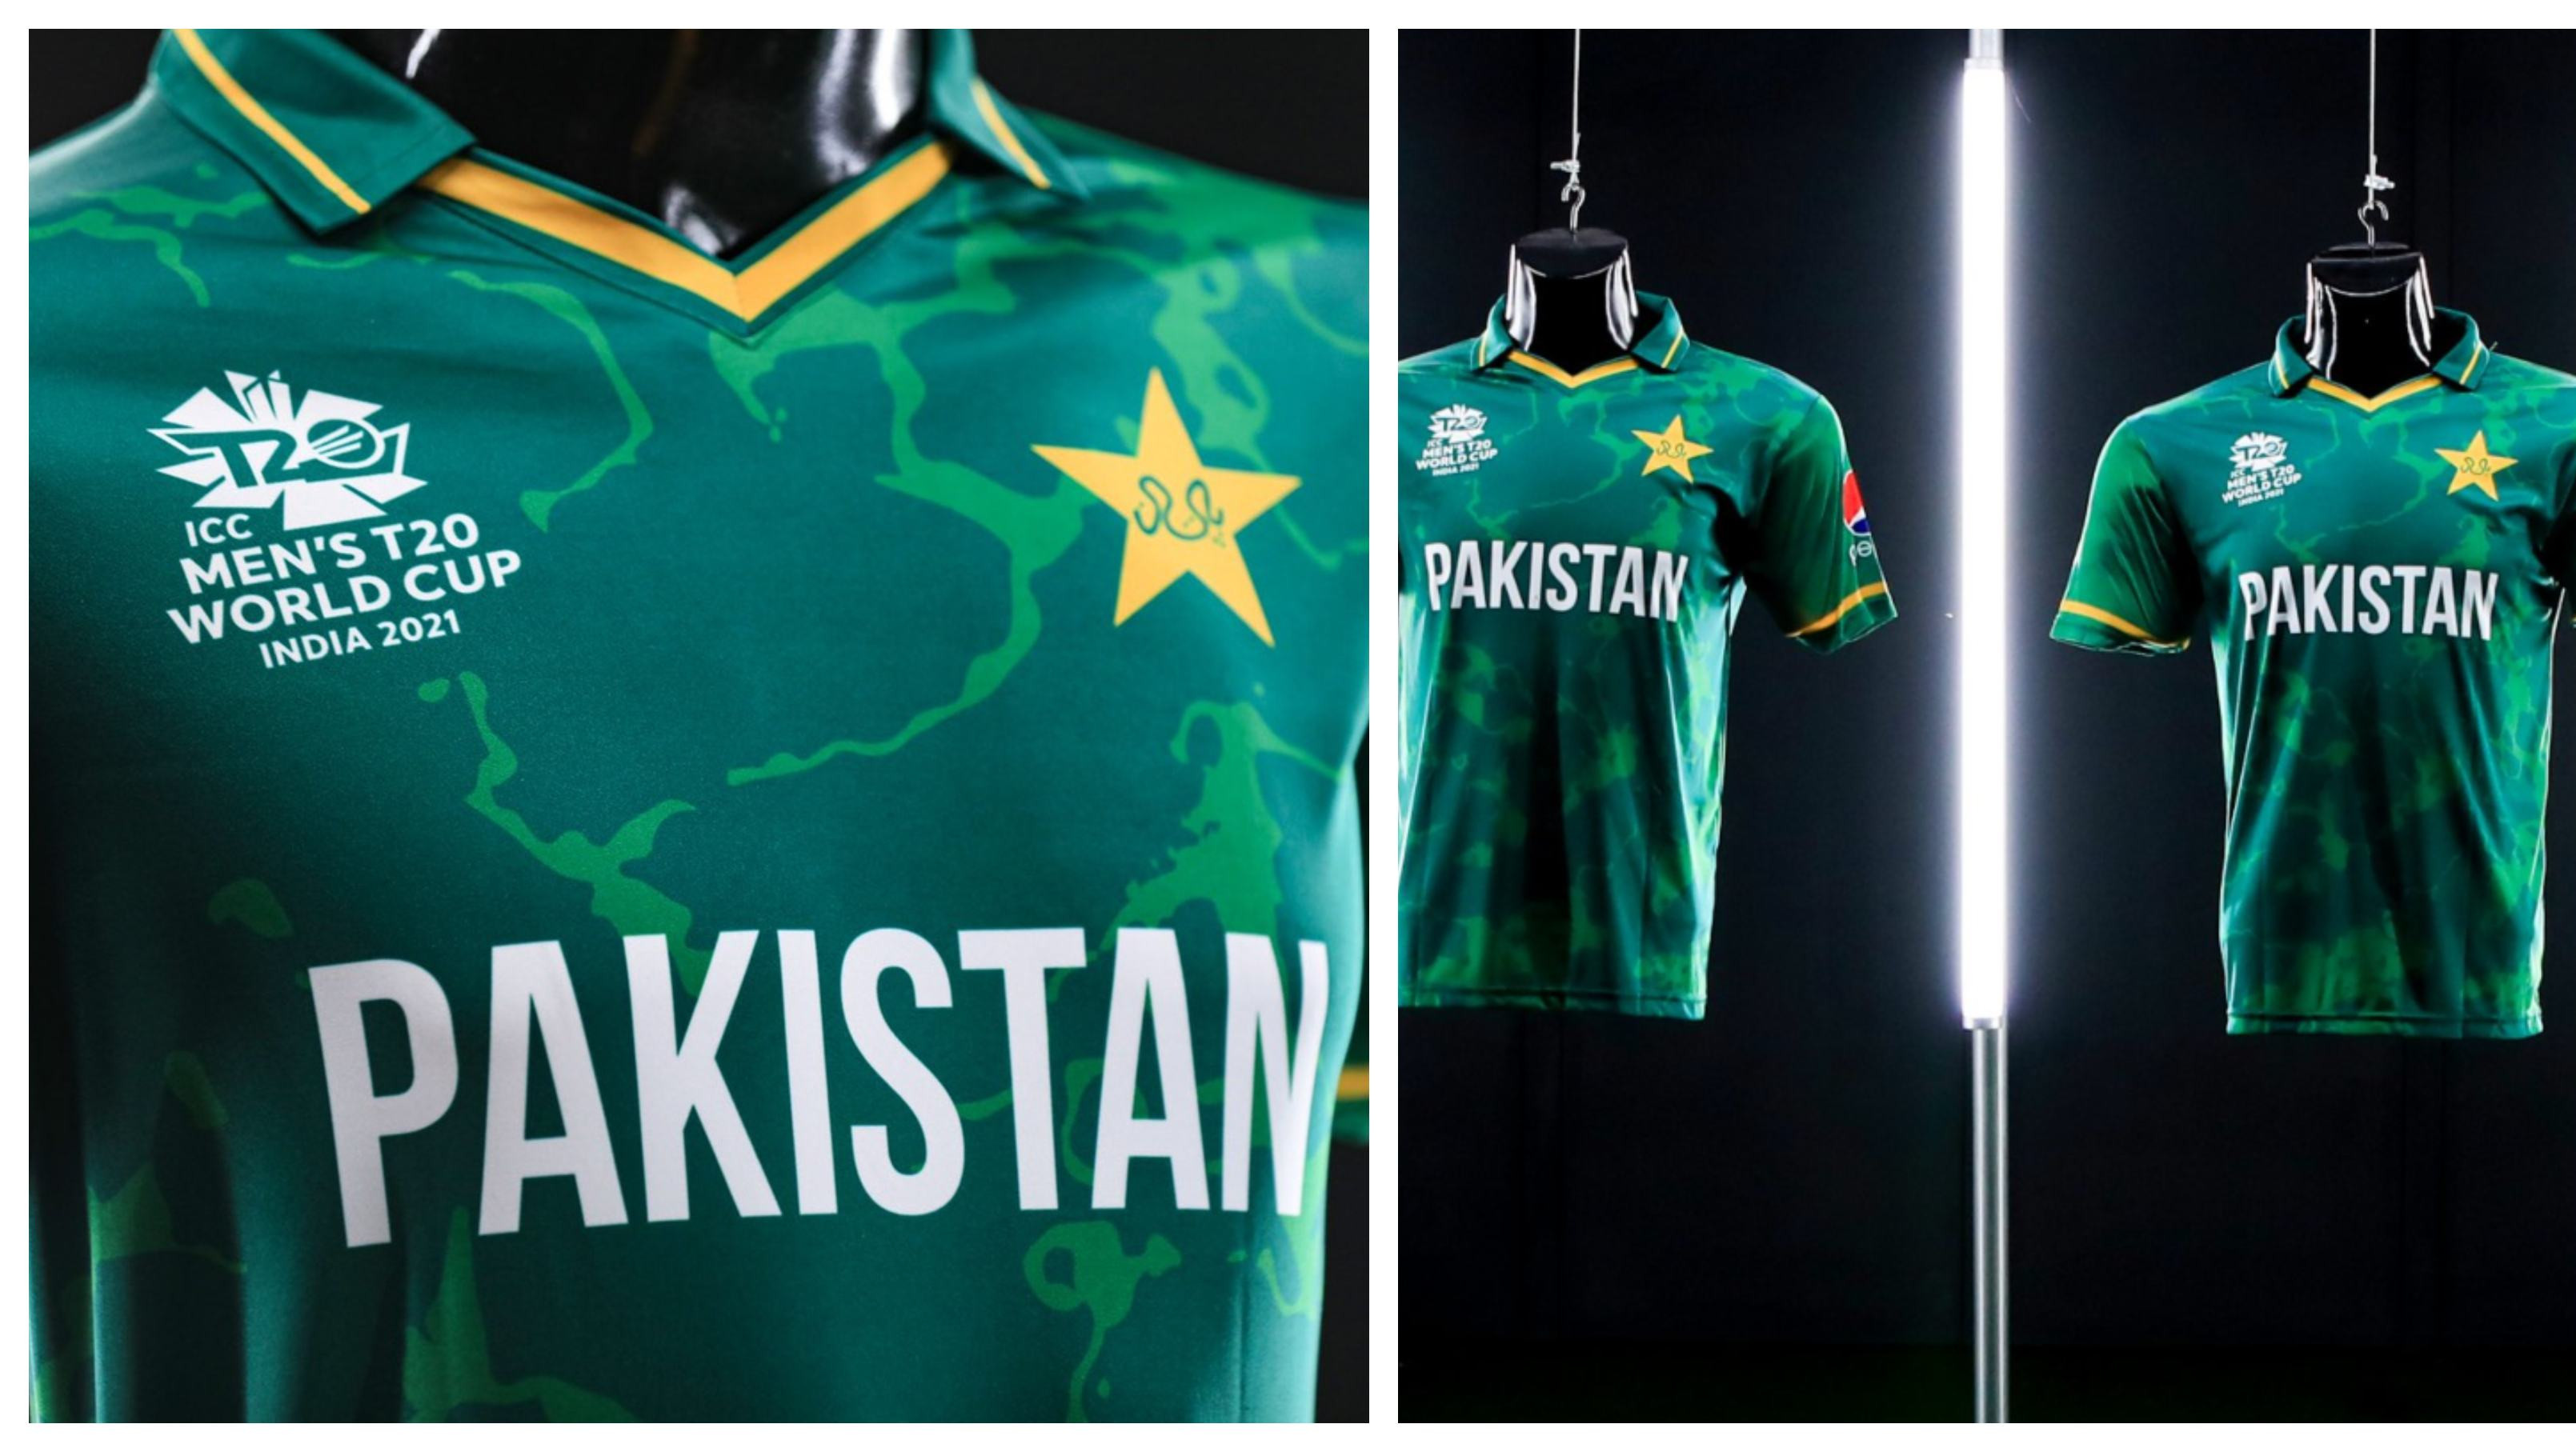 T20 World Cup 2021: PCB launches Pakistan cricket team’s new jersey with ‘India 2021’ logo 